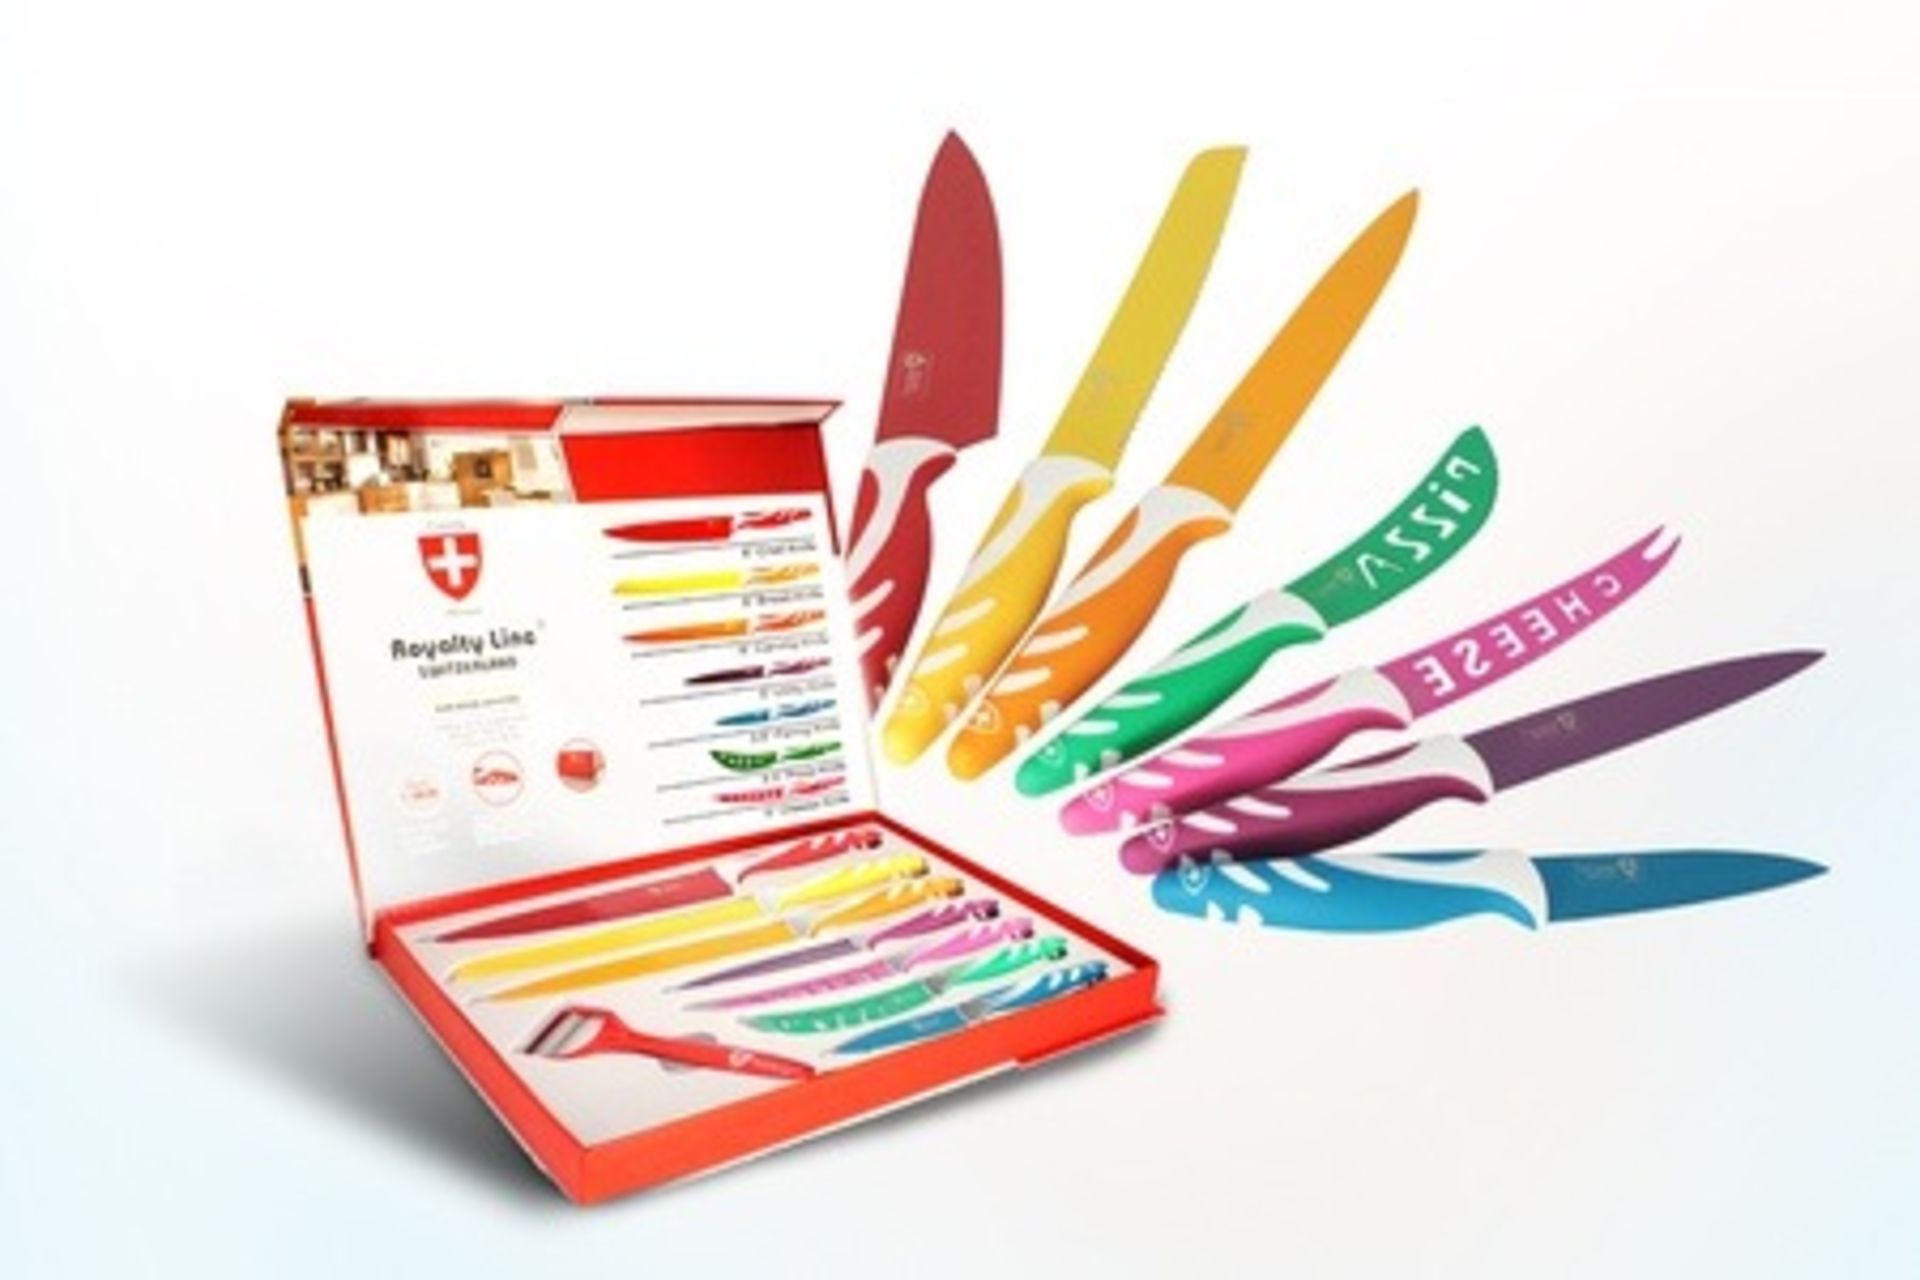 V *TRADE QTY* Brand New 8 Piece Non-Stick Coated Coloured Knife Set RRP169.00 Euros X 10 YOUR BID - Image 2 of 2